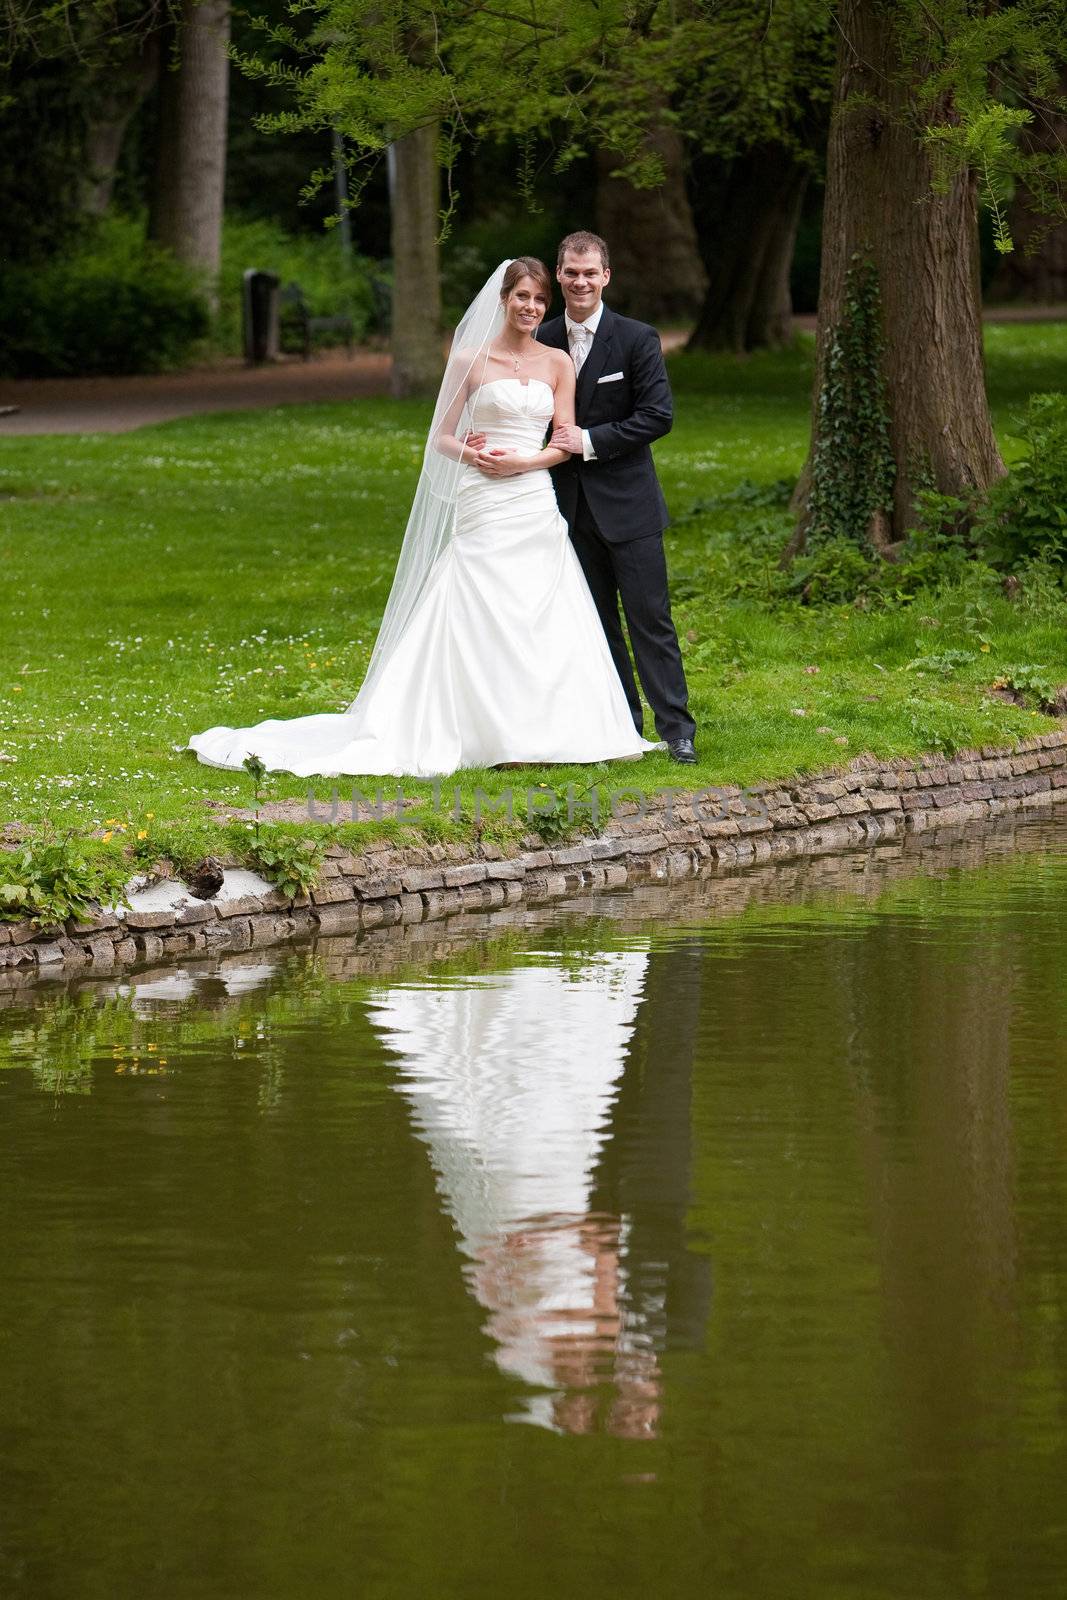 Bride and groom in the park near a pond reflecting